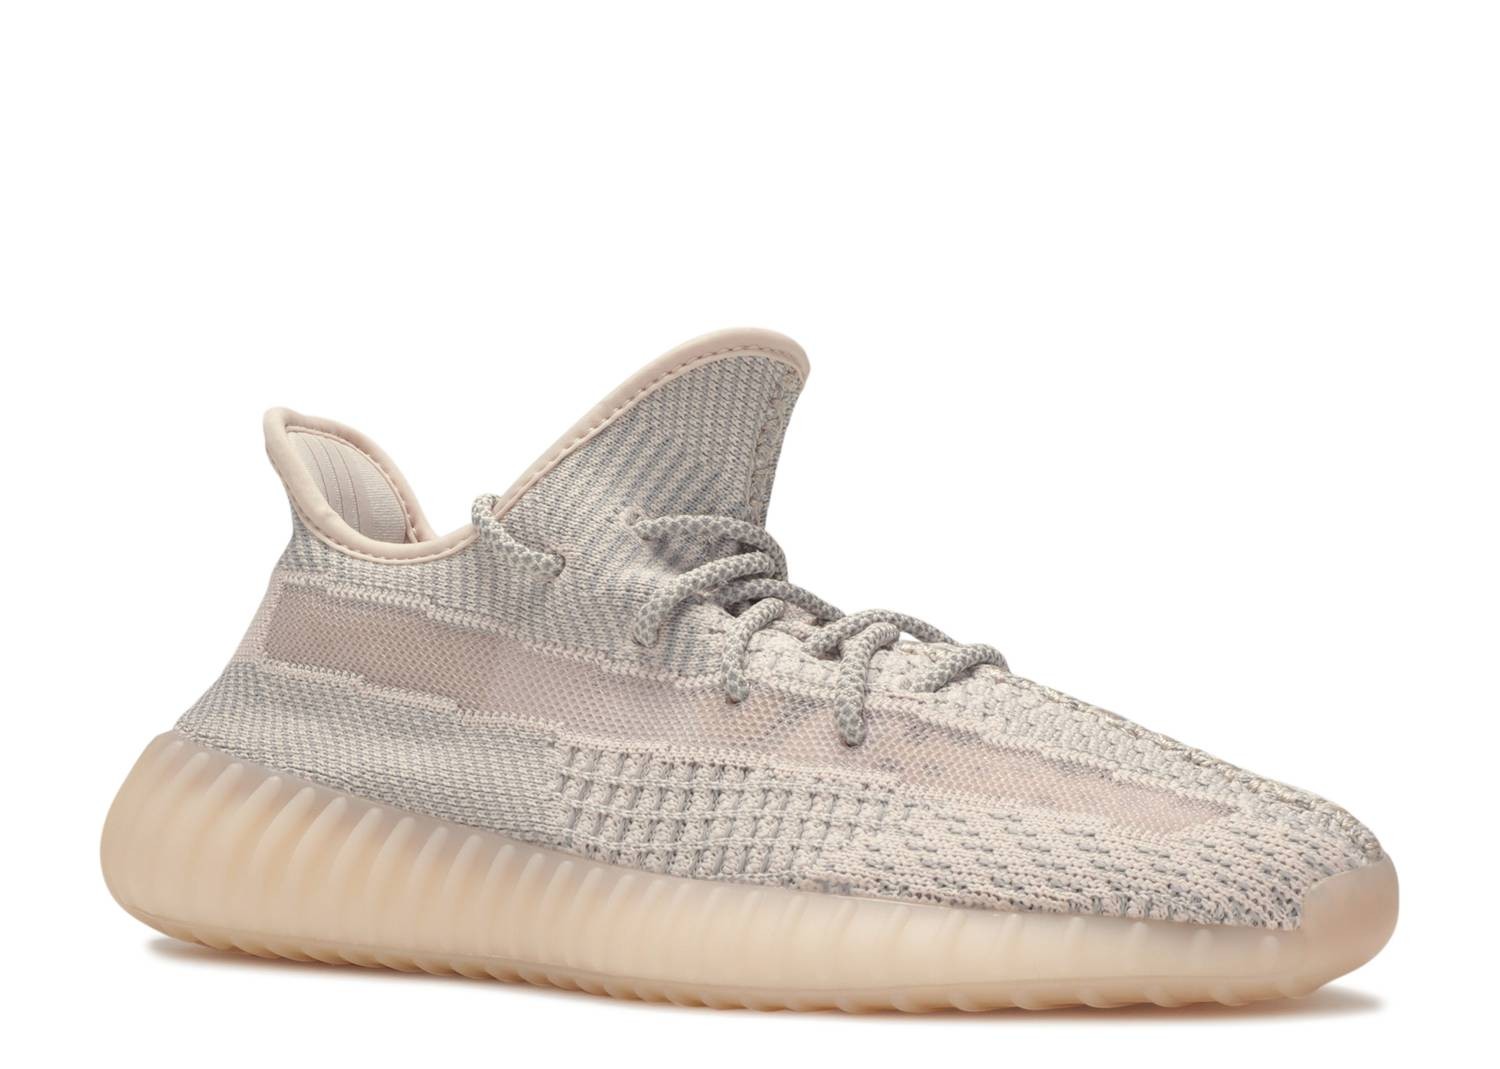 Yeezy Boost 350 V2 Synth Non-Reflective